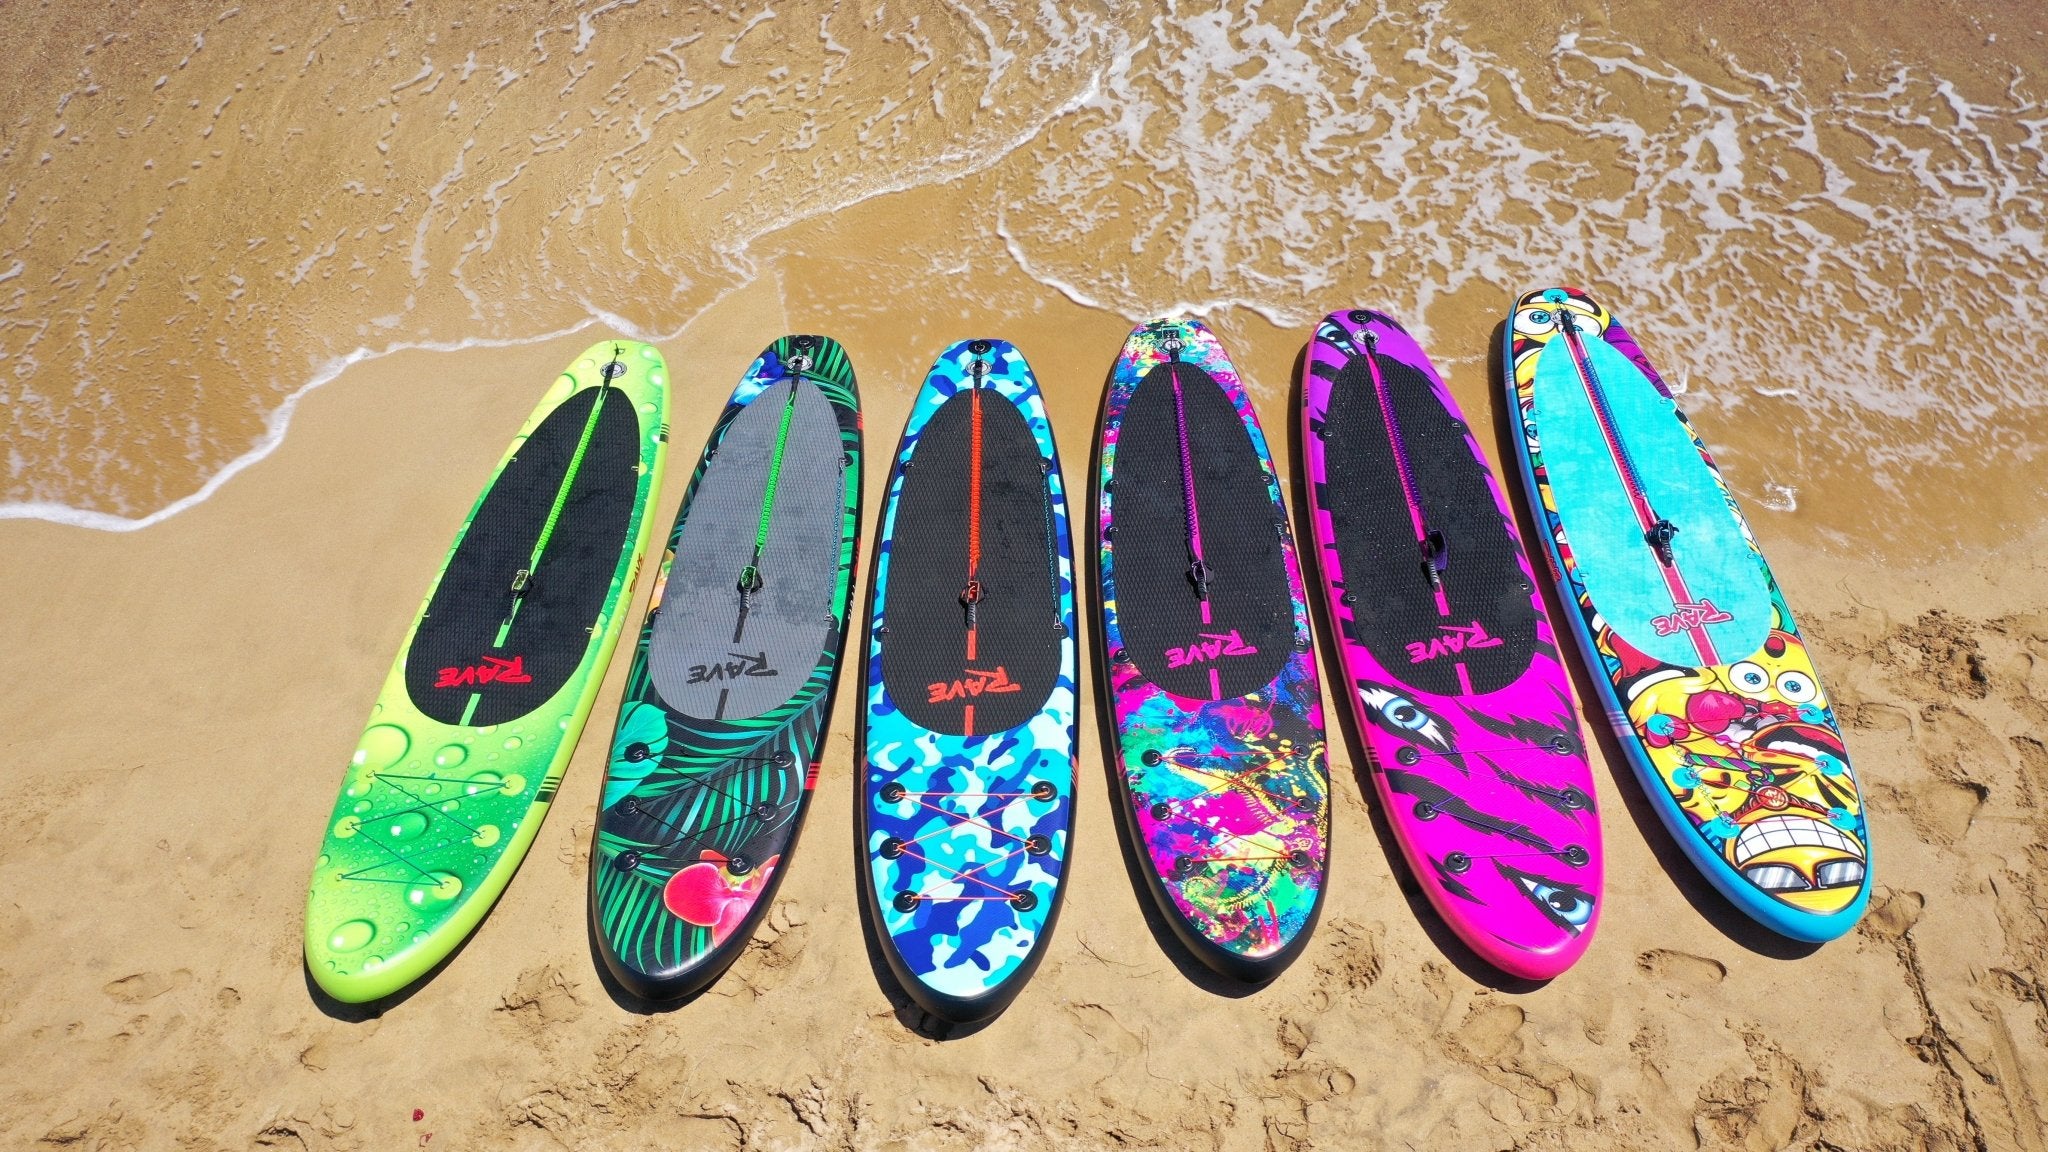 Paddle Board Accessories - Tidal rave sports